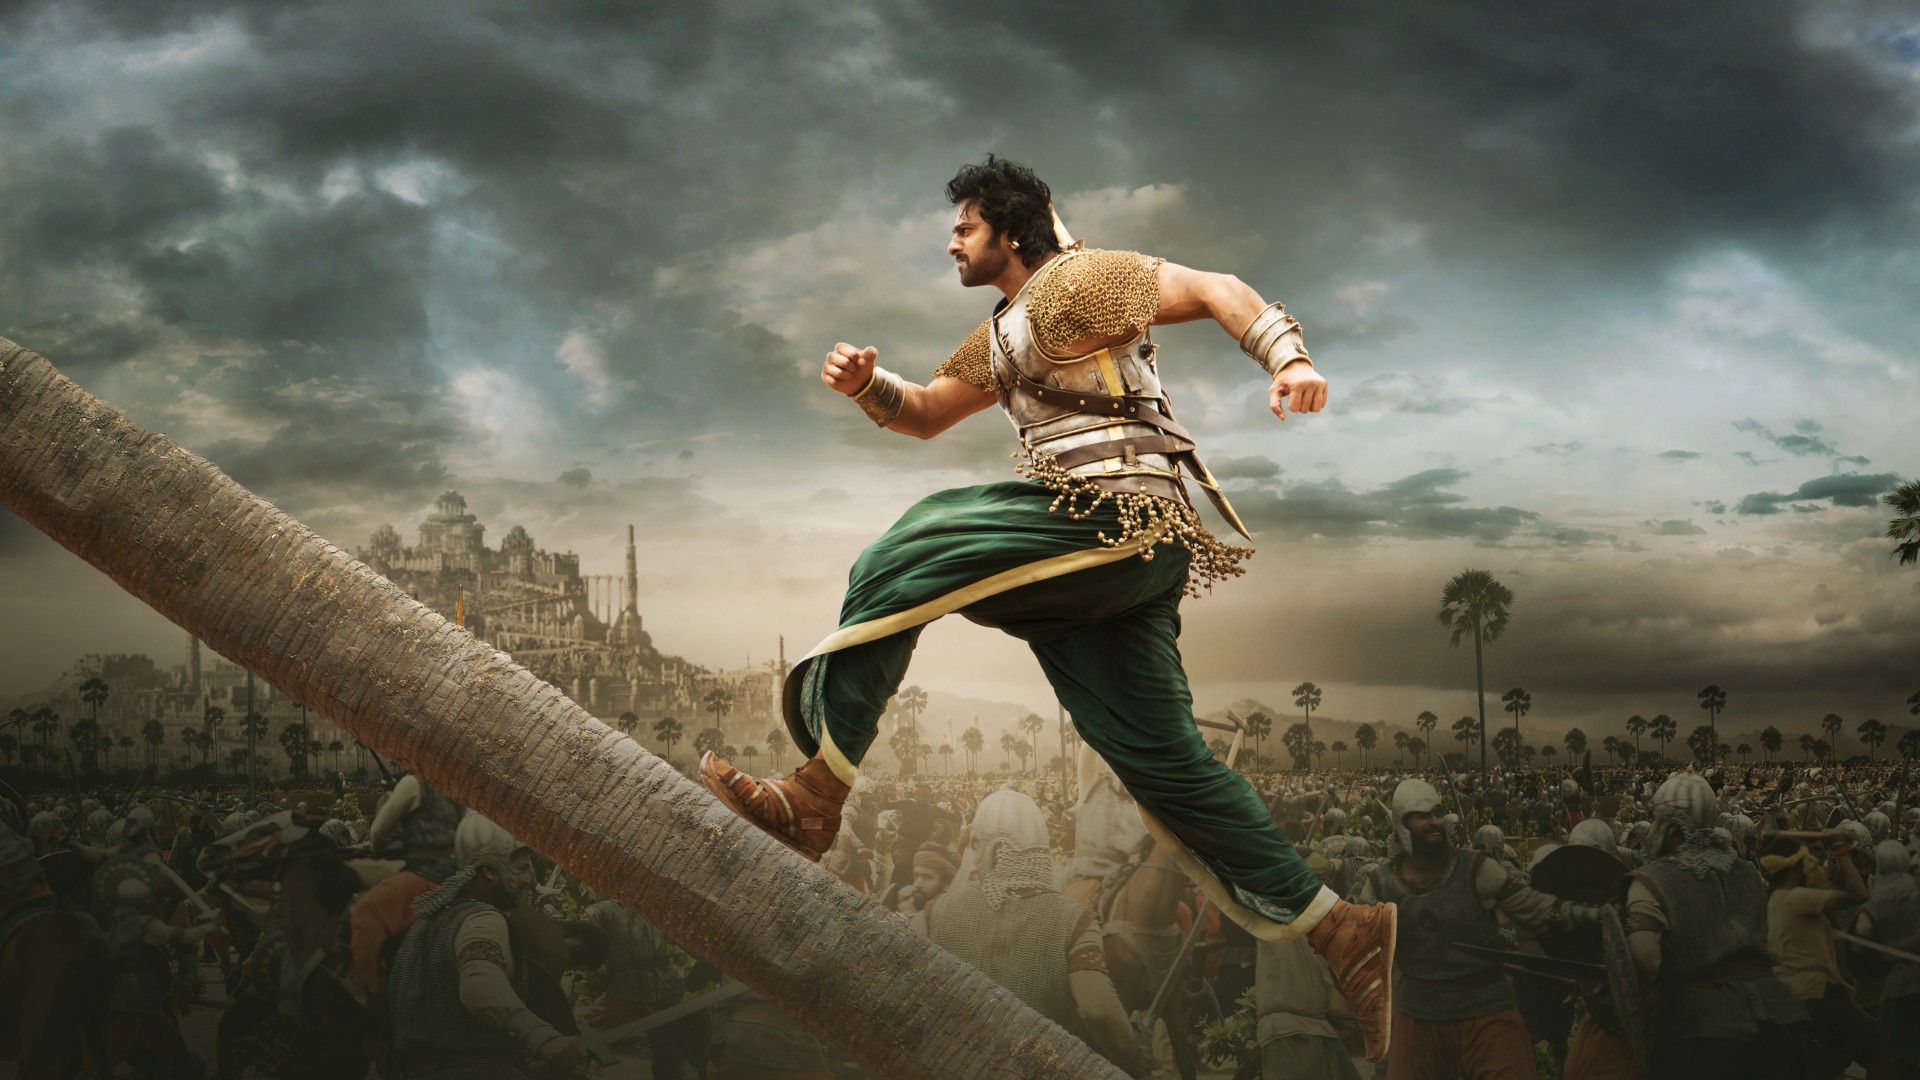 baahubali 2: the conclusion, movie images